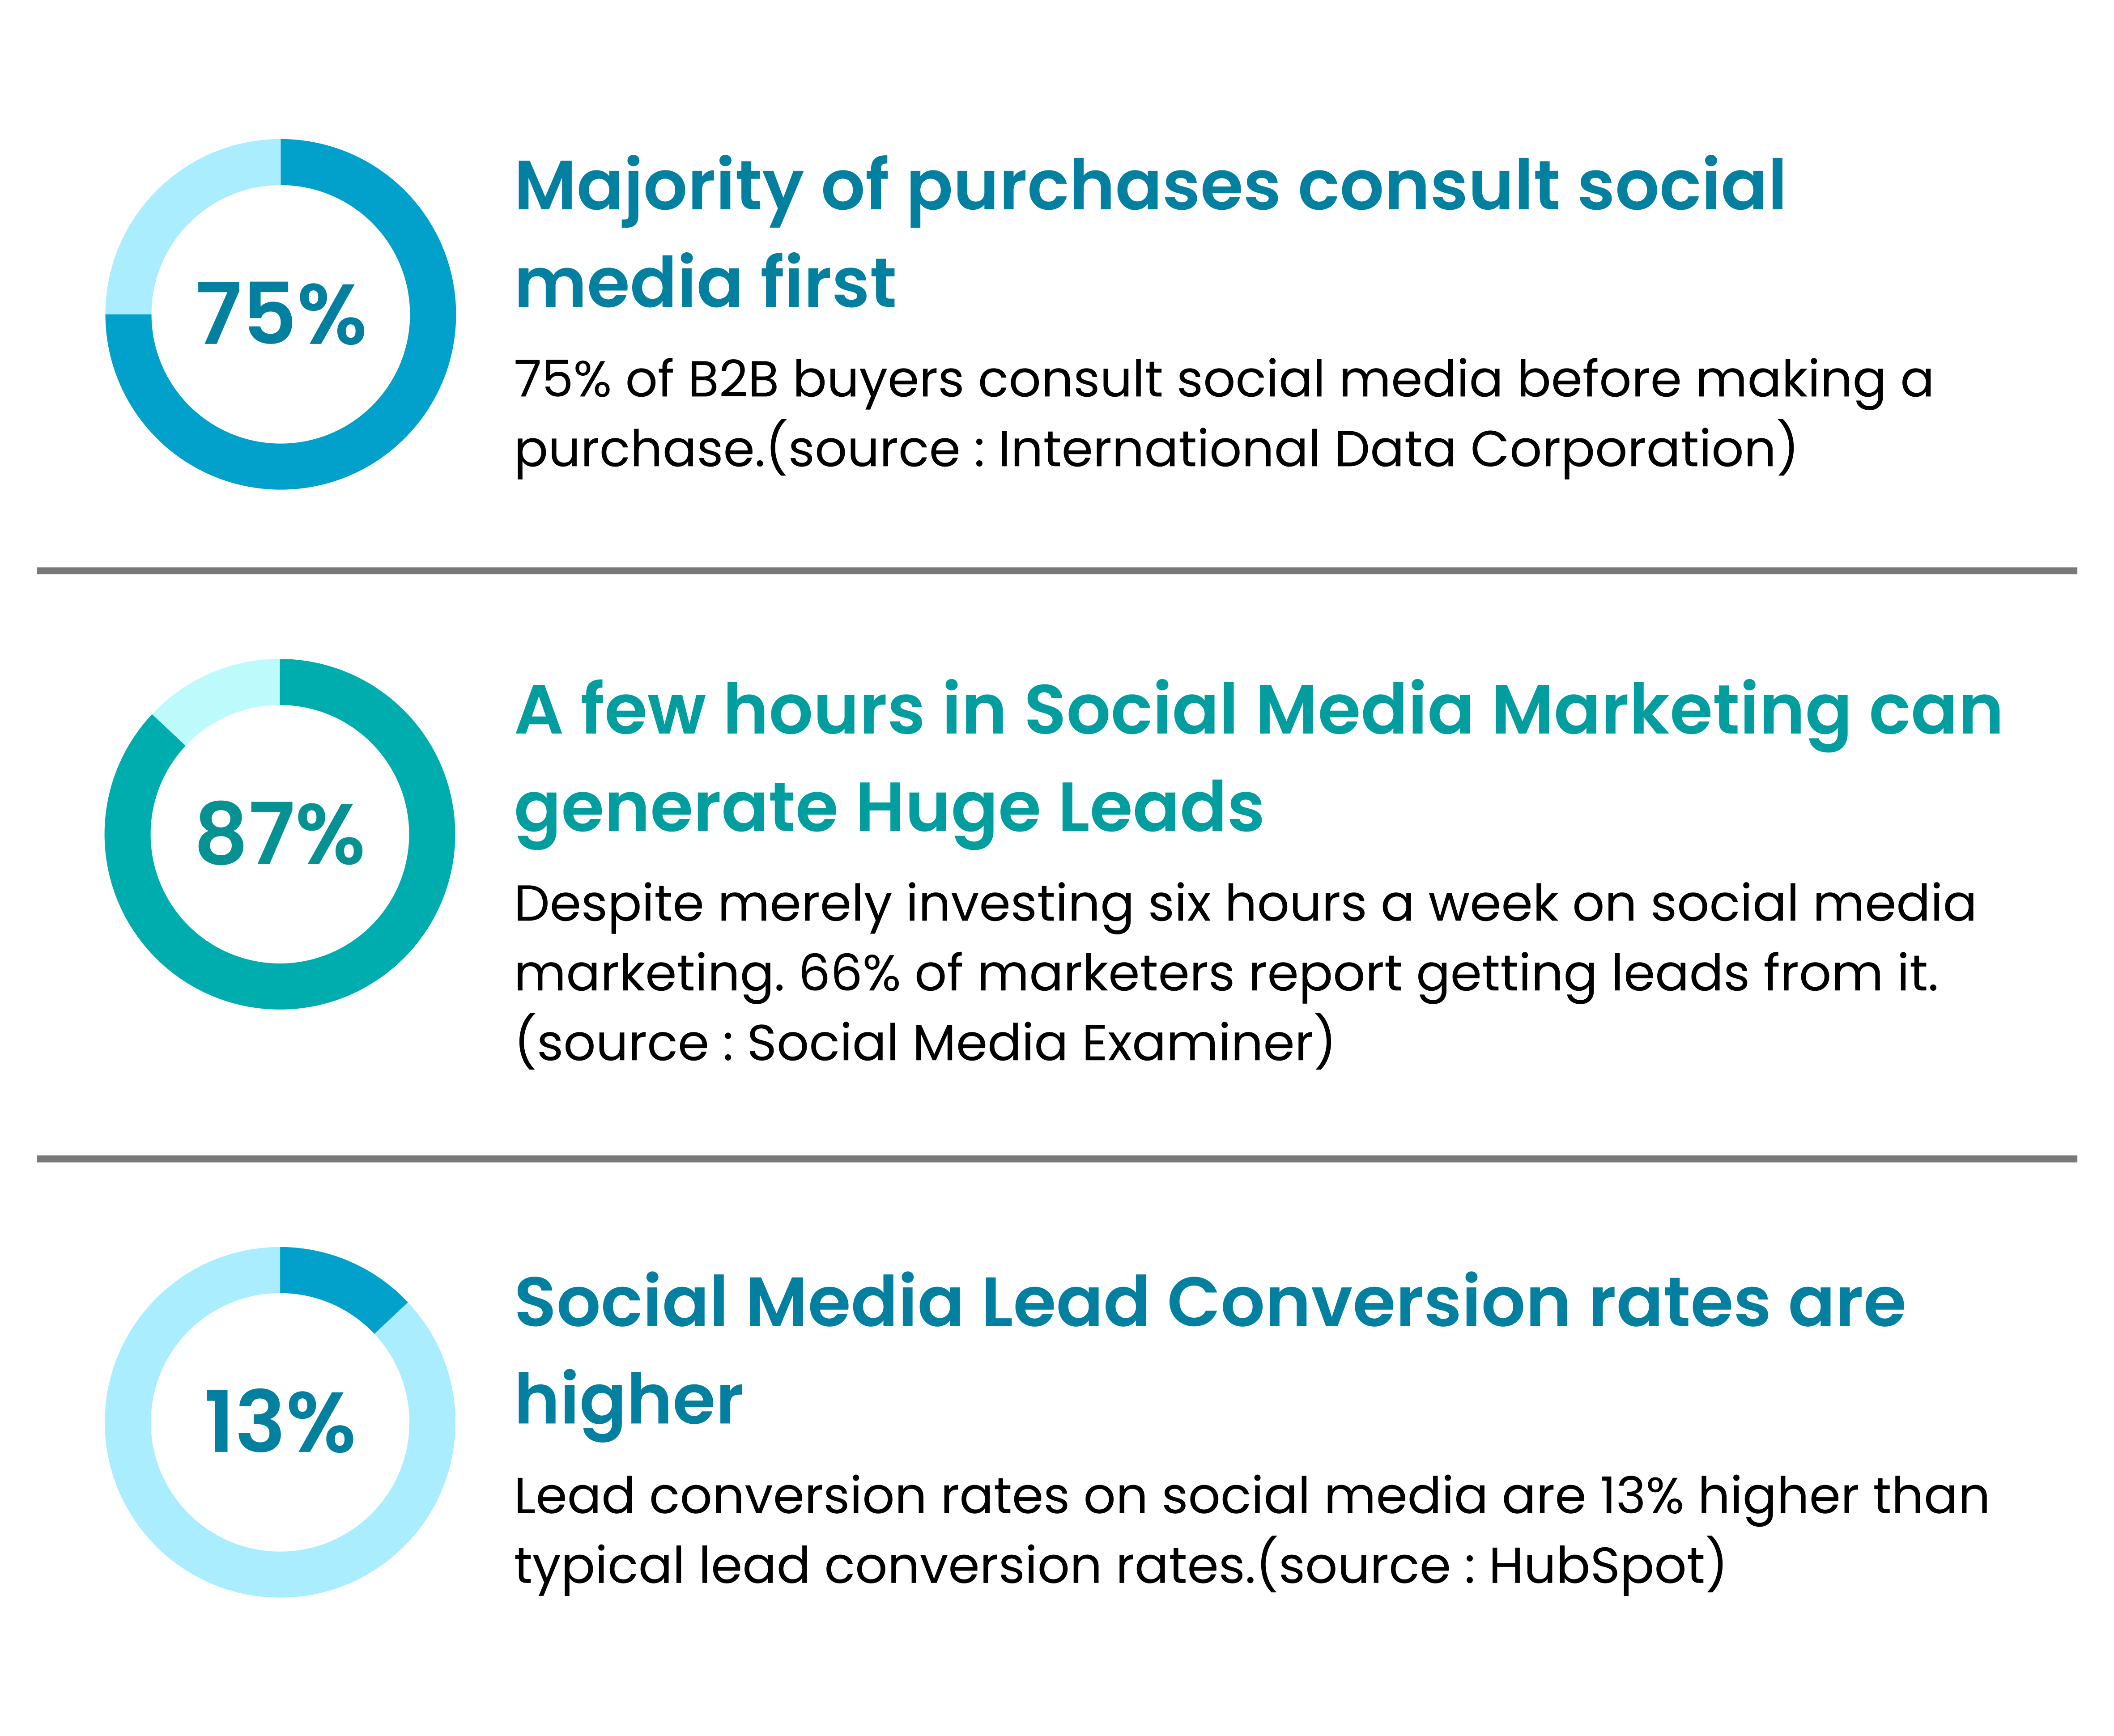 Majority of purchases consult Social Media First